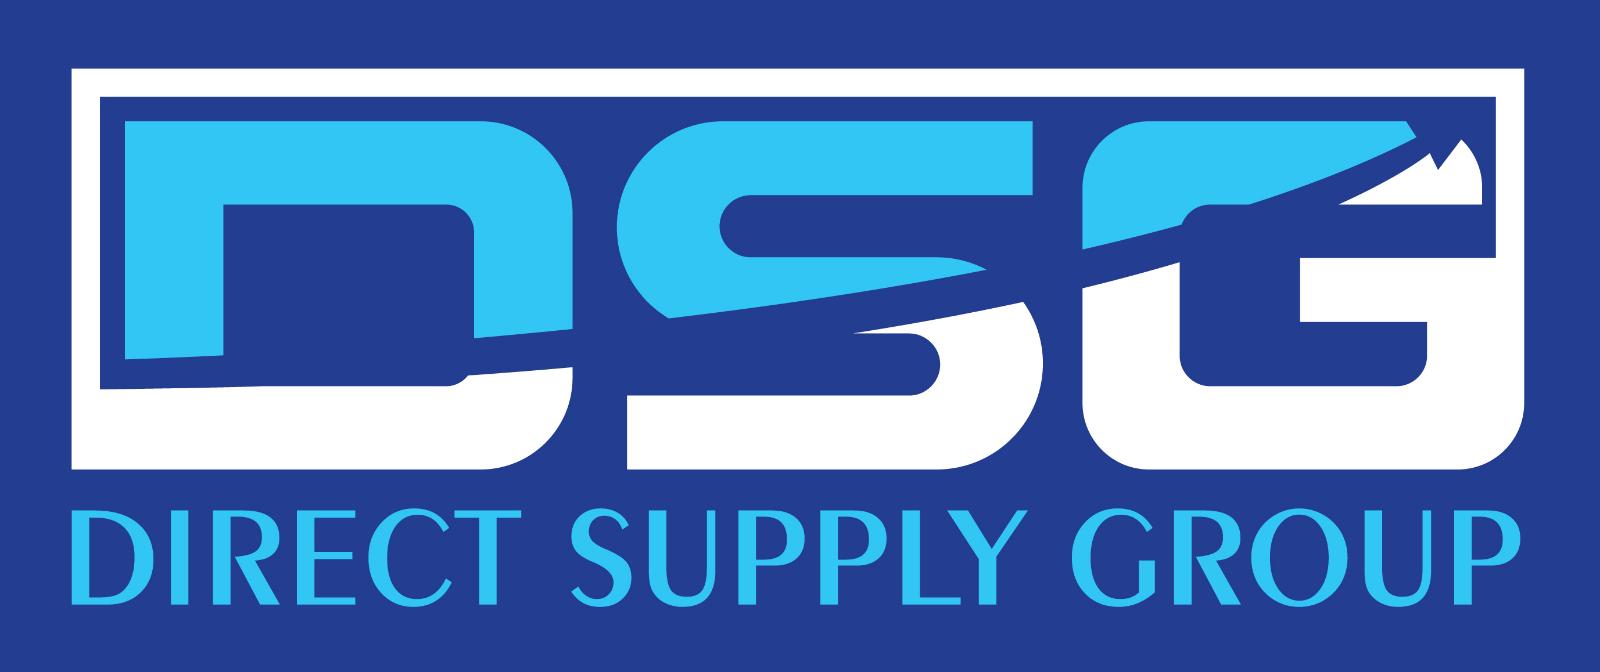 Direct Supply Group